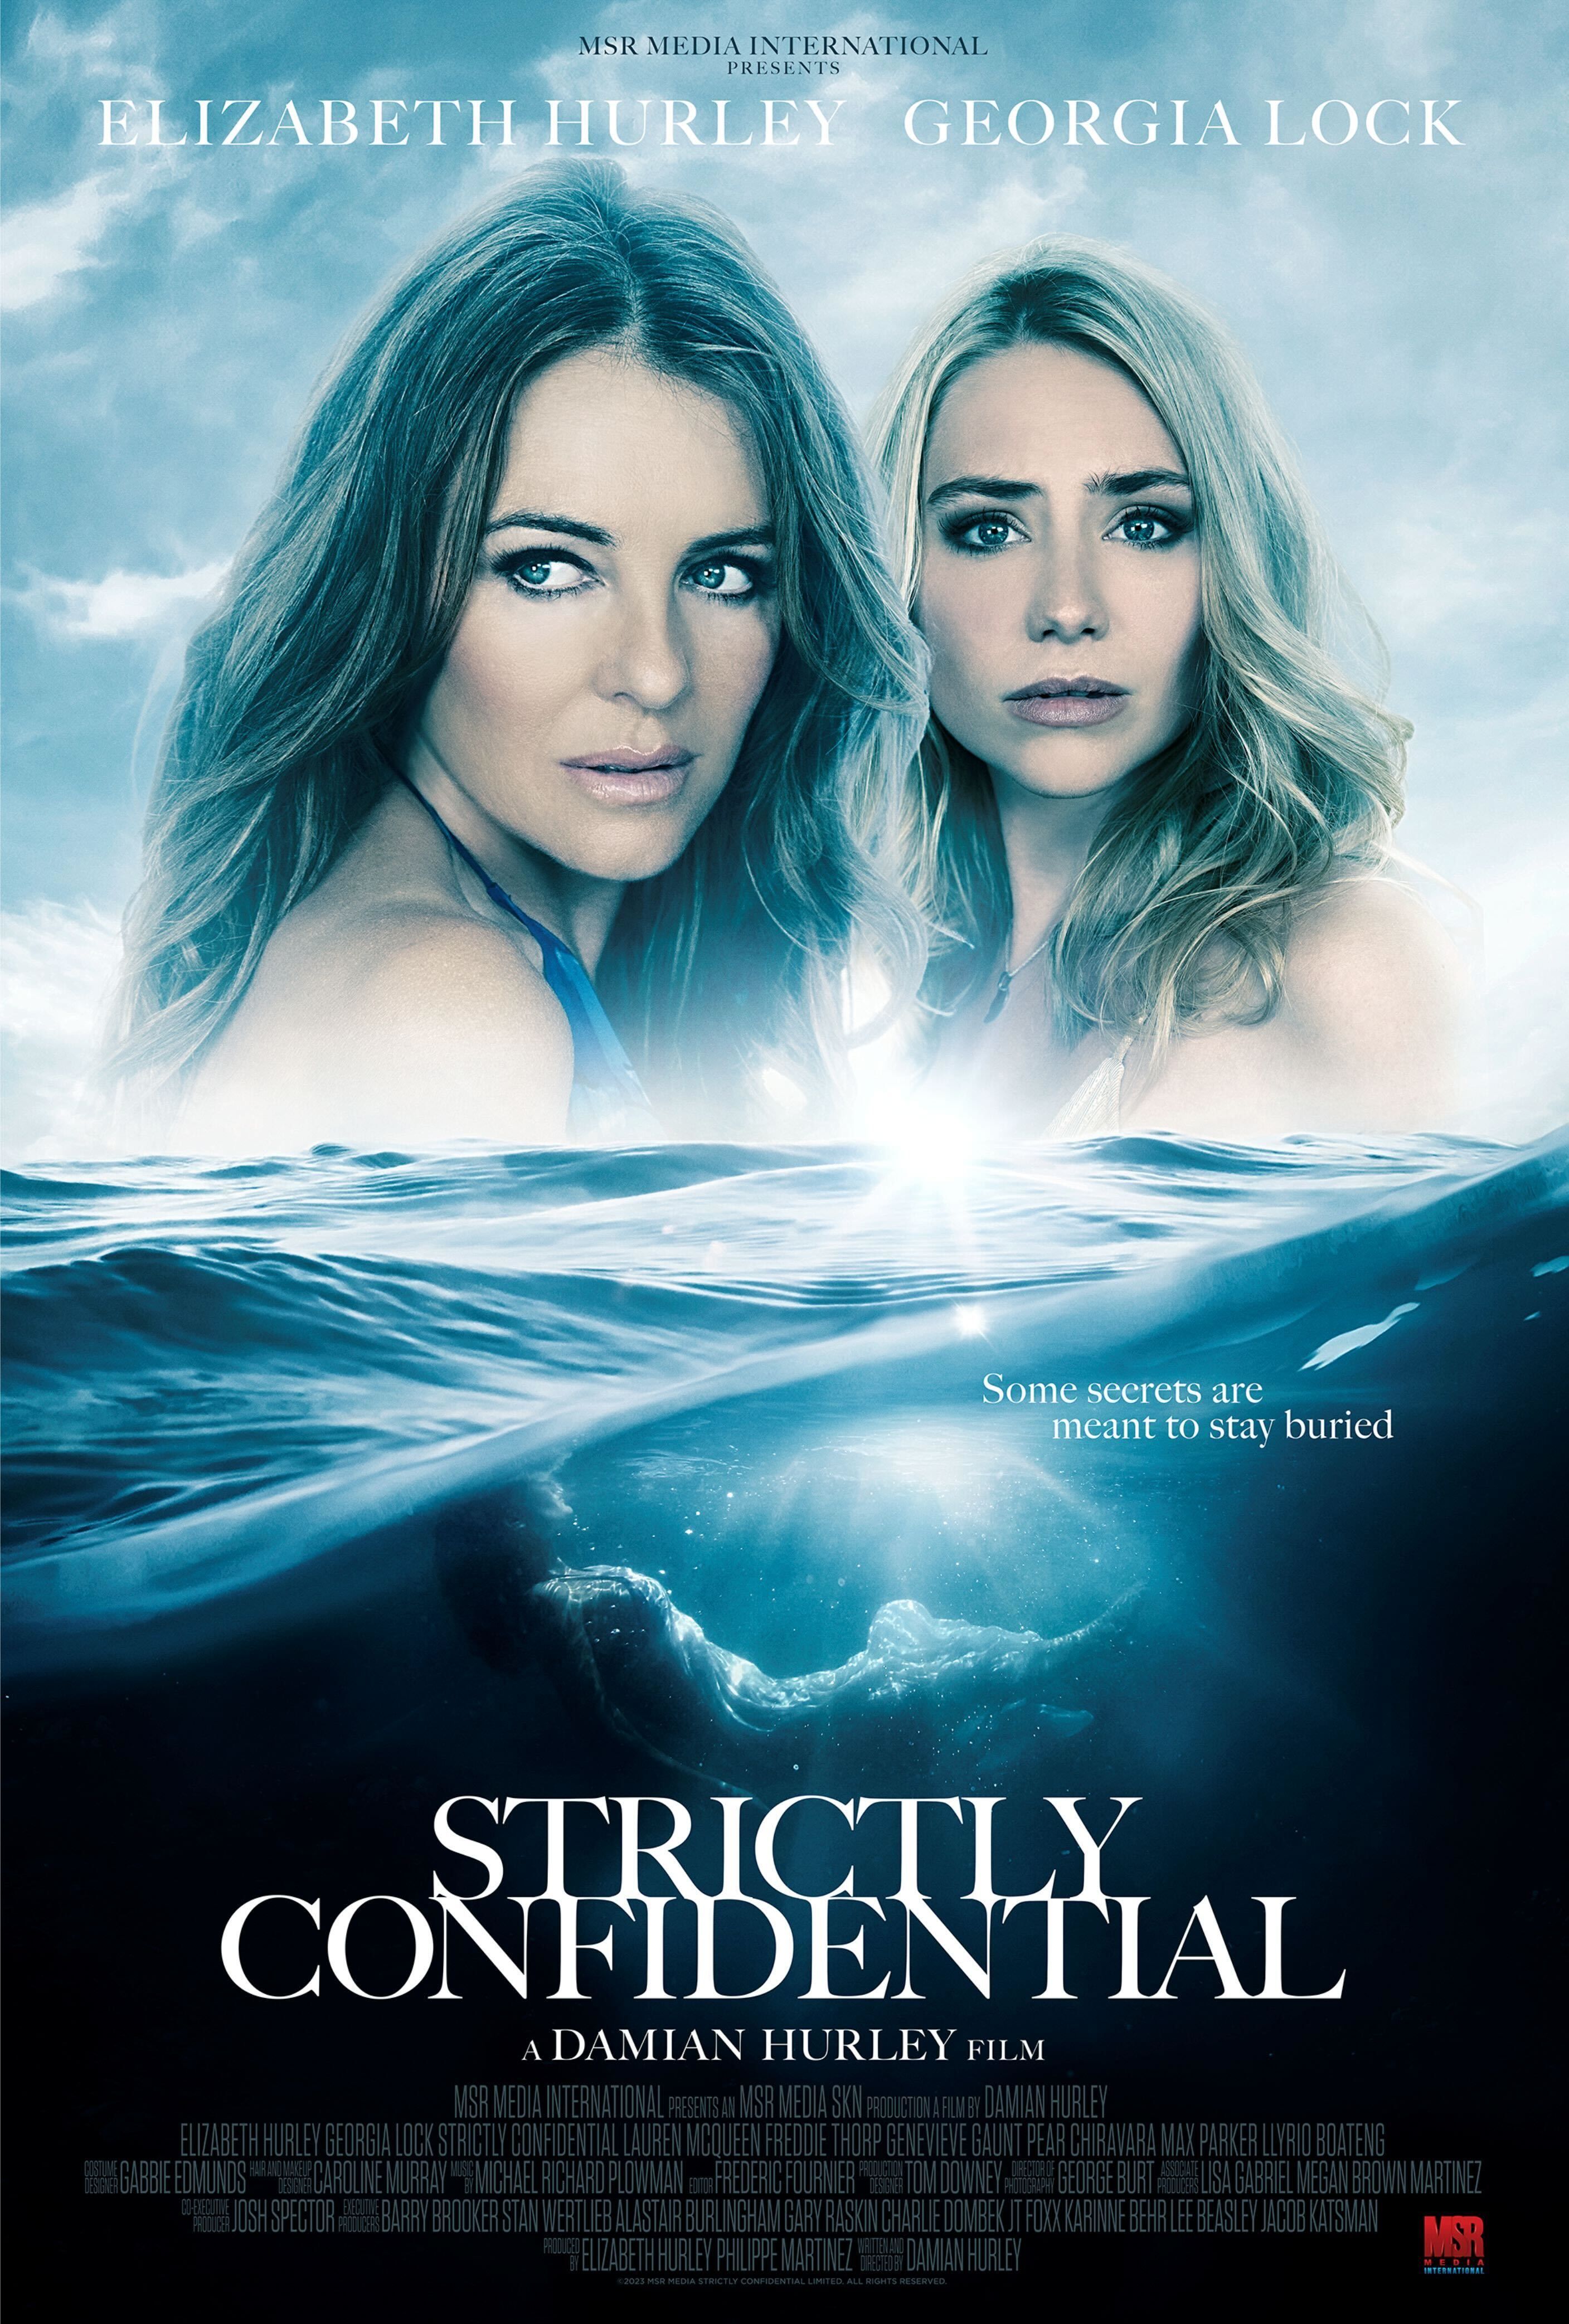 Elizabeth Hurley and Georgia Lock on the poster for Strictly Confidential